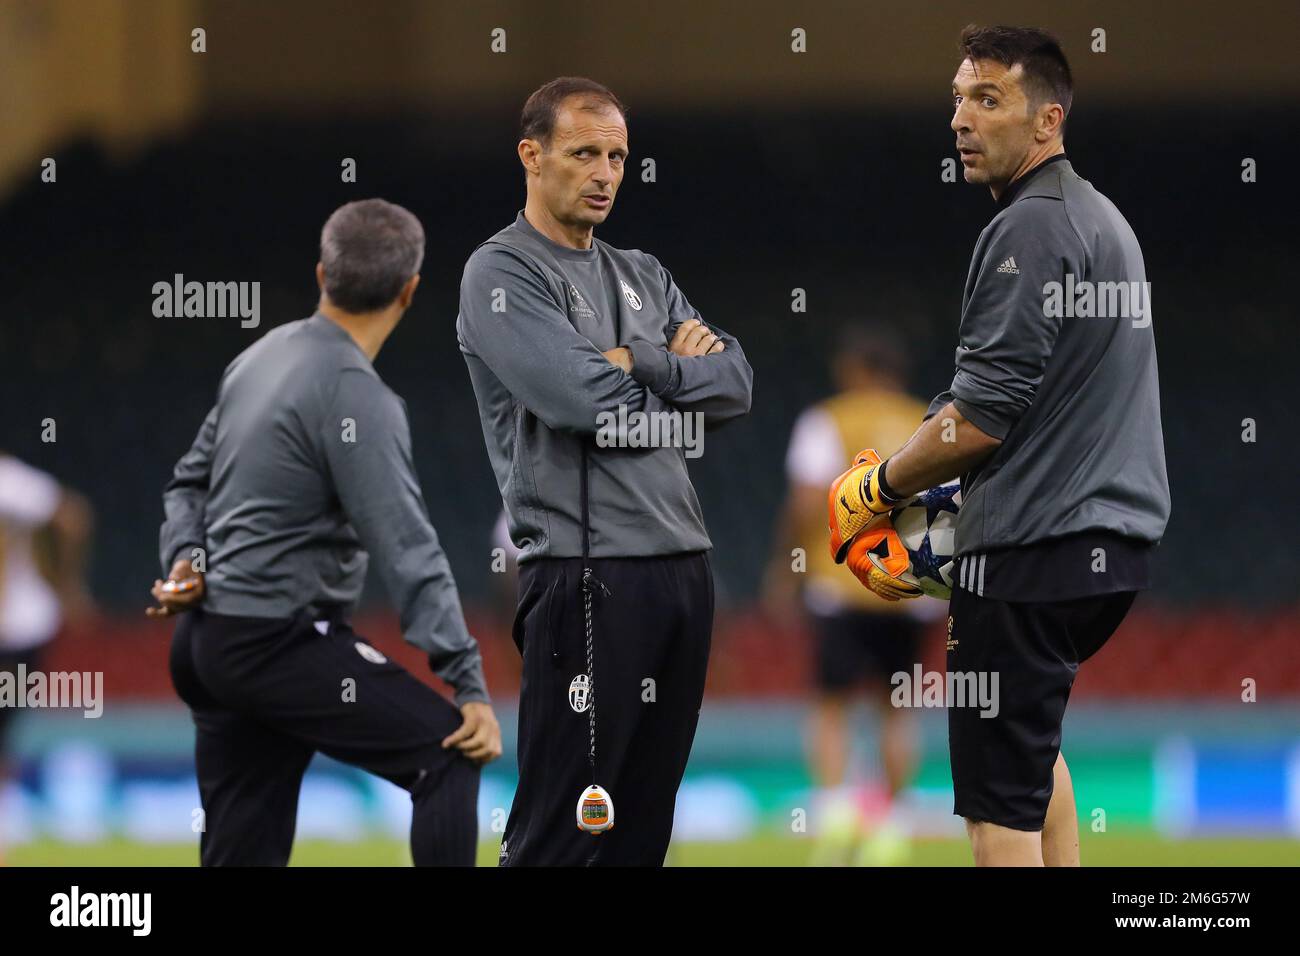 Manager of Juventus, Massimiliano Allegri and Goalkeeper, Gianluigi Buffon of Juventus - Juventus training ahead of the UEFA Champions League Final, National Stadium of Wales, Cardiff - 2nd June 2017. Stock Photo